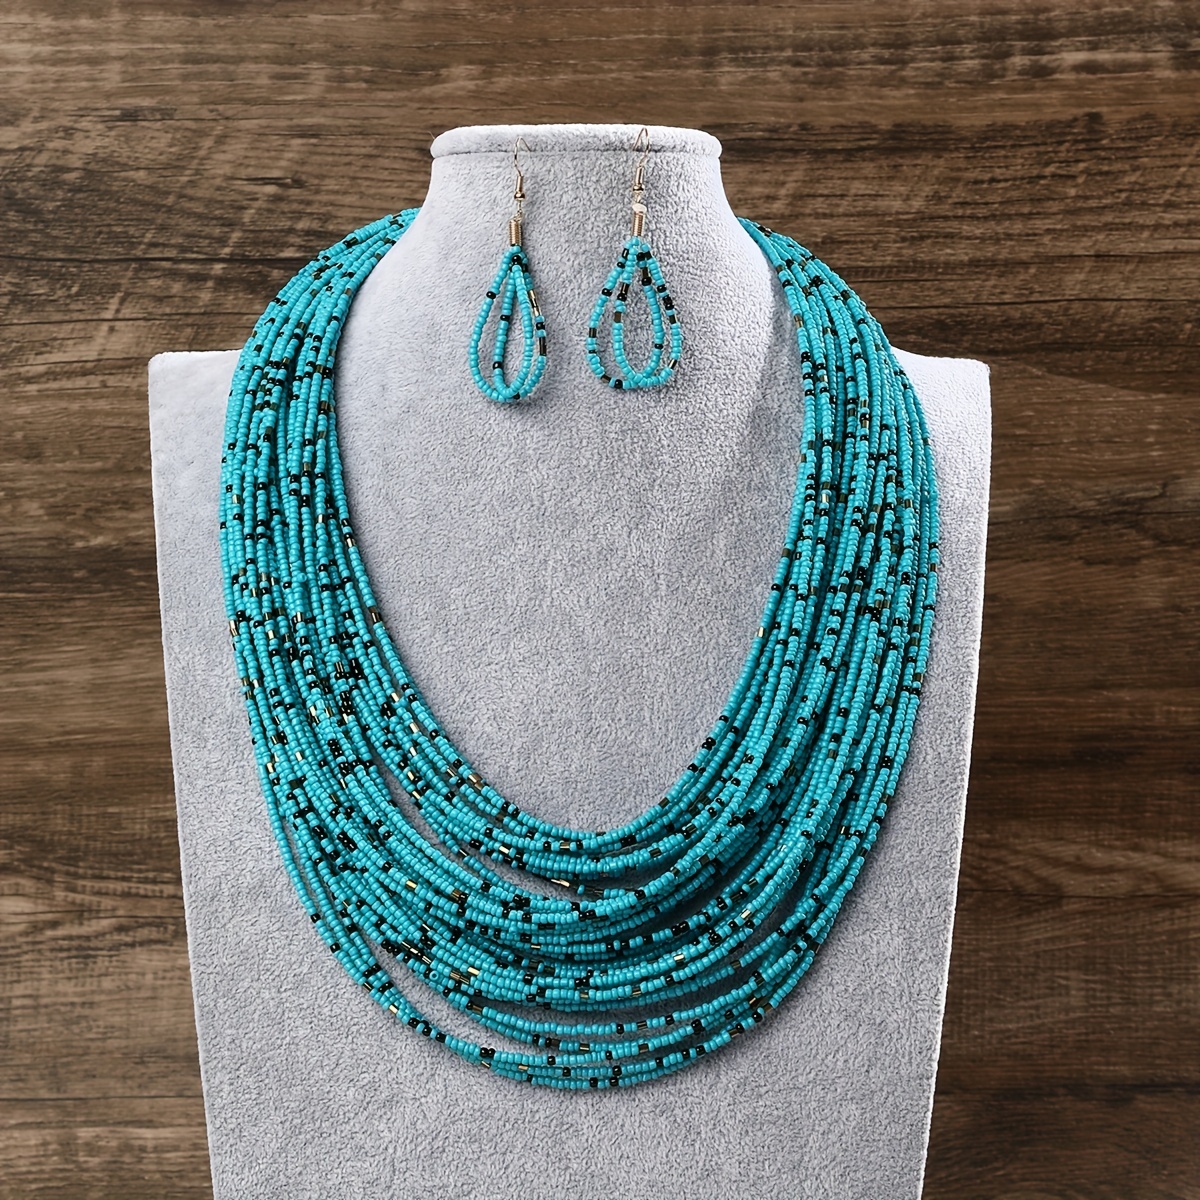 

3pcs Earrings Plus Necklace Boho Style Jewelry Set Made Of Tiny Beads Trendy Multi Layer Design Match Daily Outfits